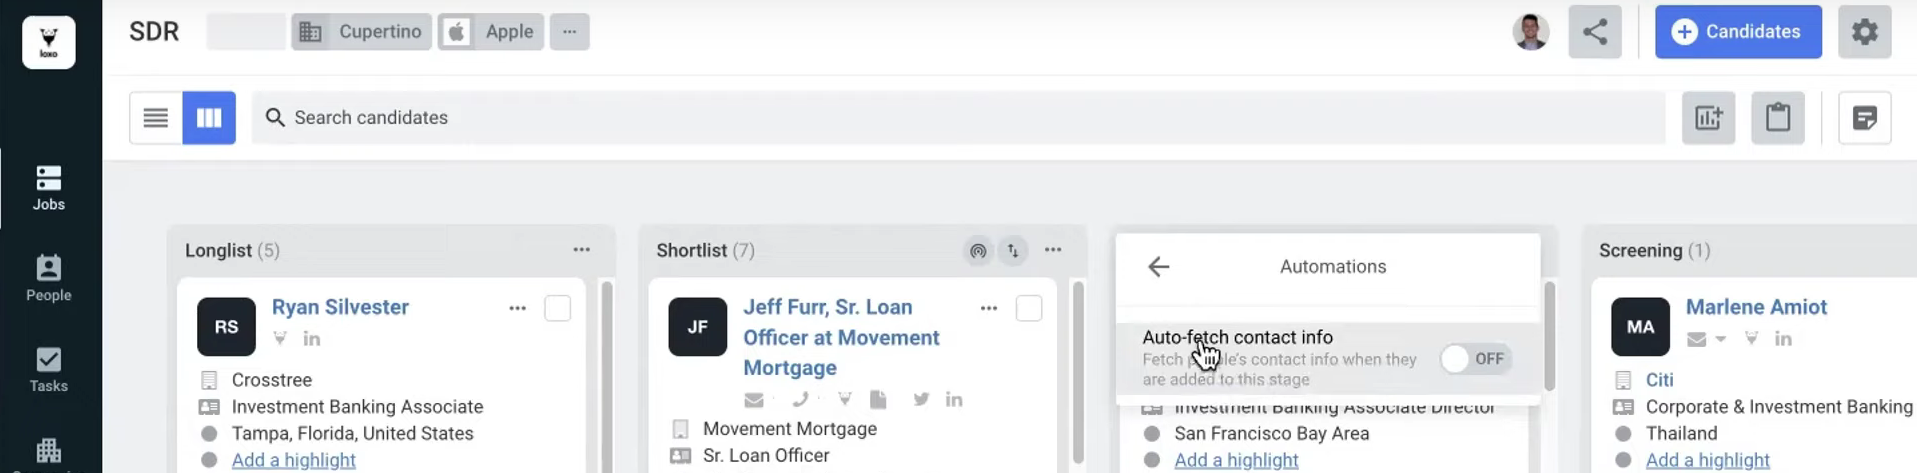 Loxo provides users with the option to auto-fetch candidate contact info in one click